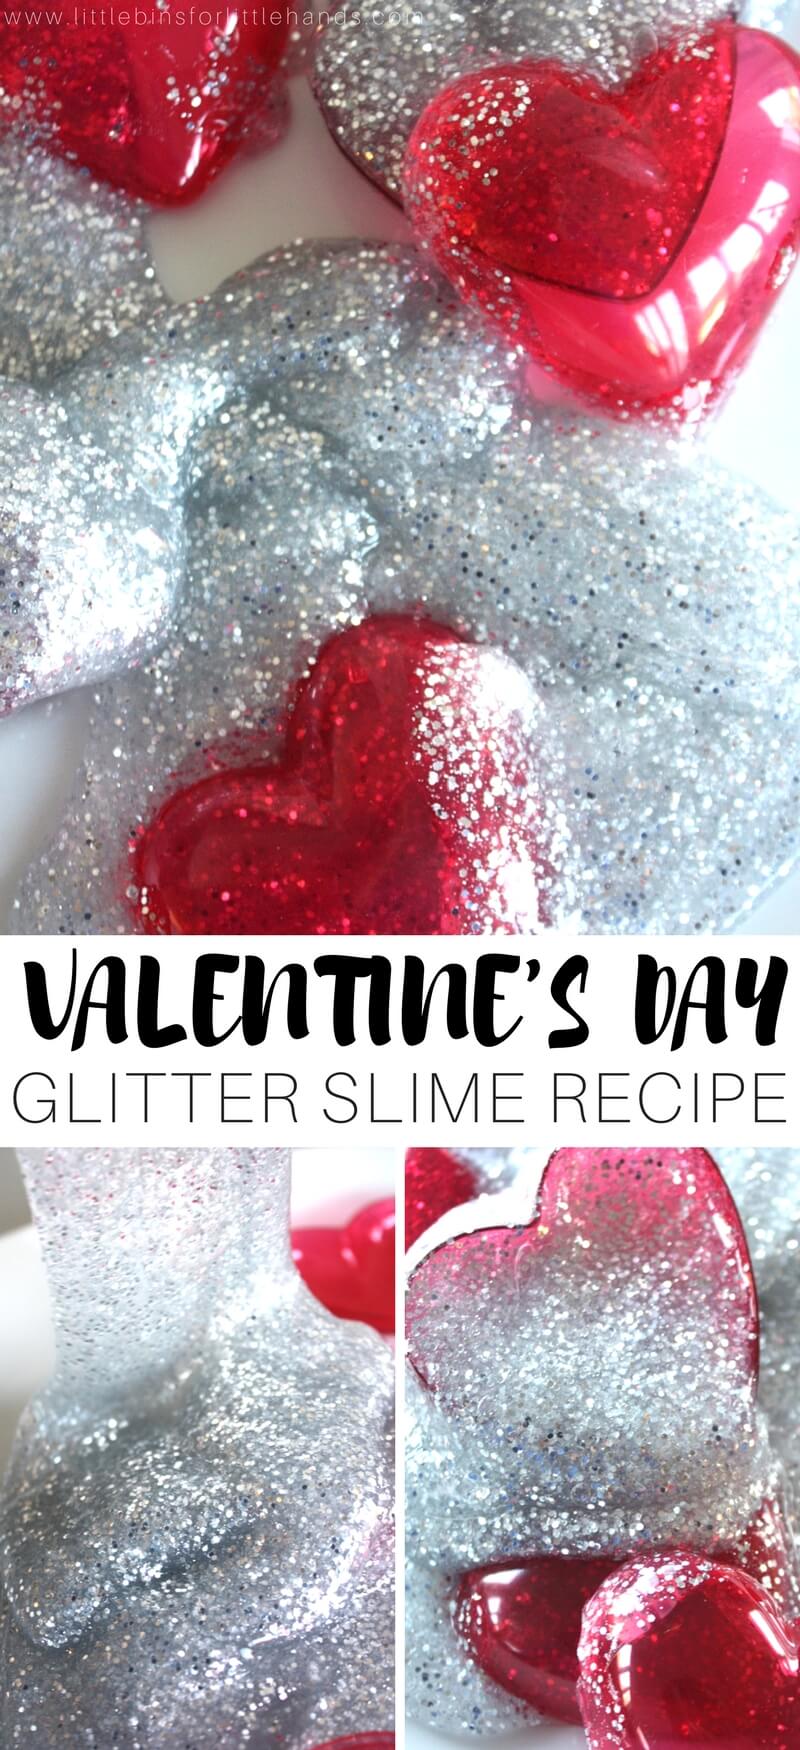 Glitter, hearts, and stretchy sparkling slime. Nothing says Valentine/s Day like a batch of homemade slime! I might be a little obsessed with the latest Valentines Day Slime! Honestly, it's because it's so easy and quick to make our  homemade slime recipes. I wanted to tinker a bit with the glue I used this time because I picked up these little bottles of glitter glue {but you don't necessarily need glitter glue} at the dollar store.